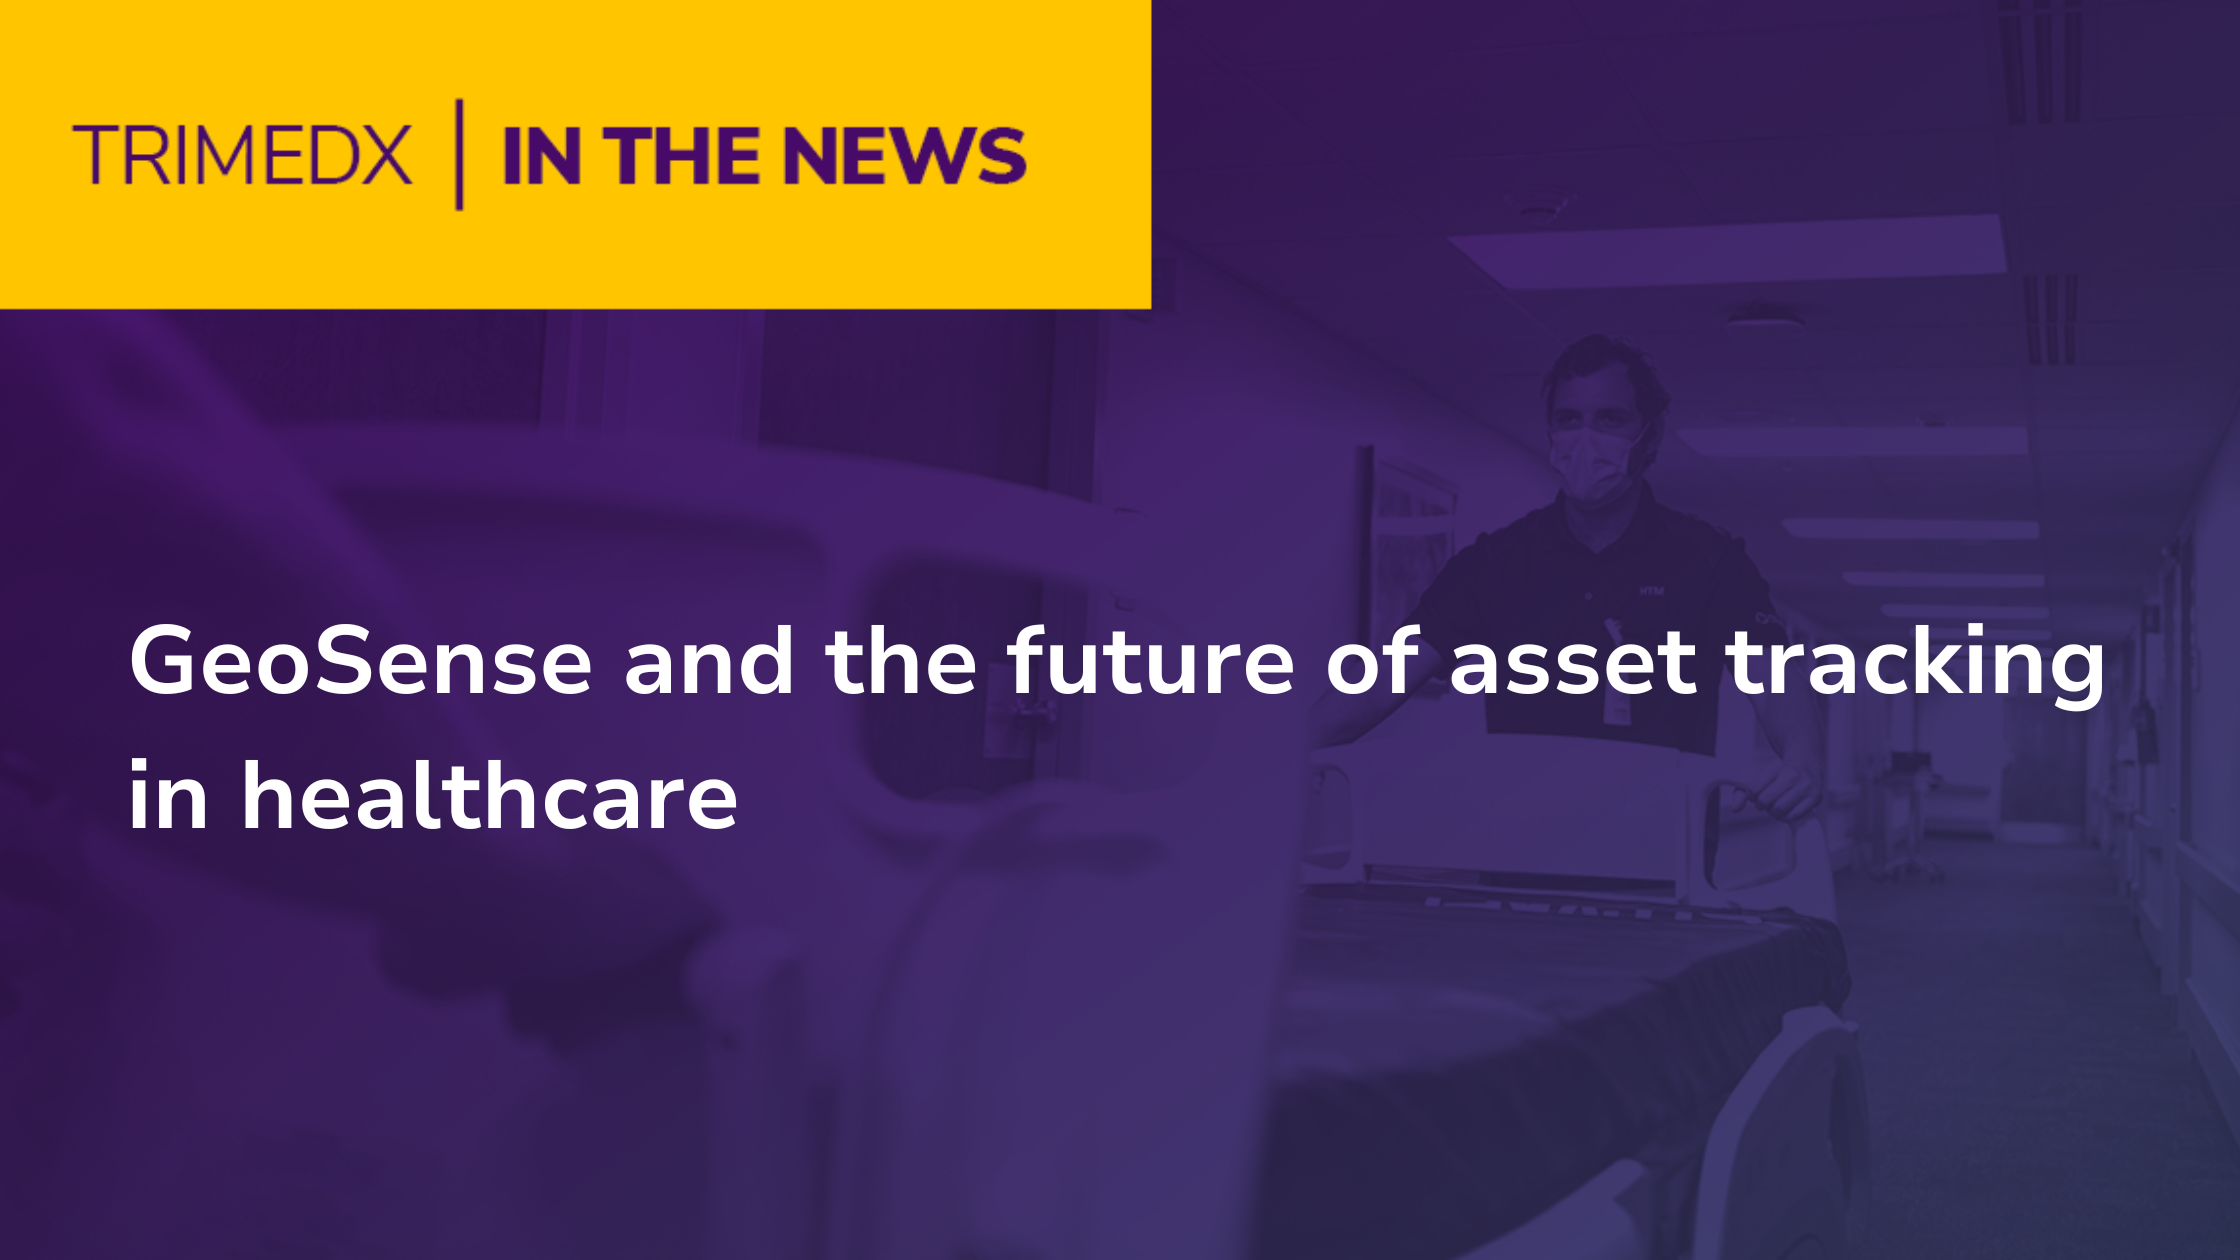 GeoSense and the future of asset tracking in healthcare - Trimedx In the News 